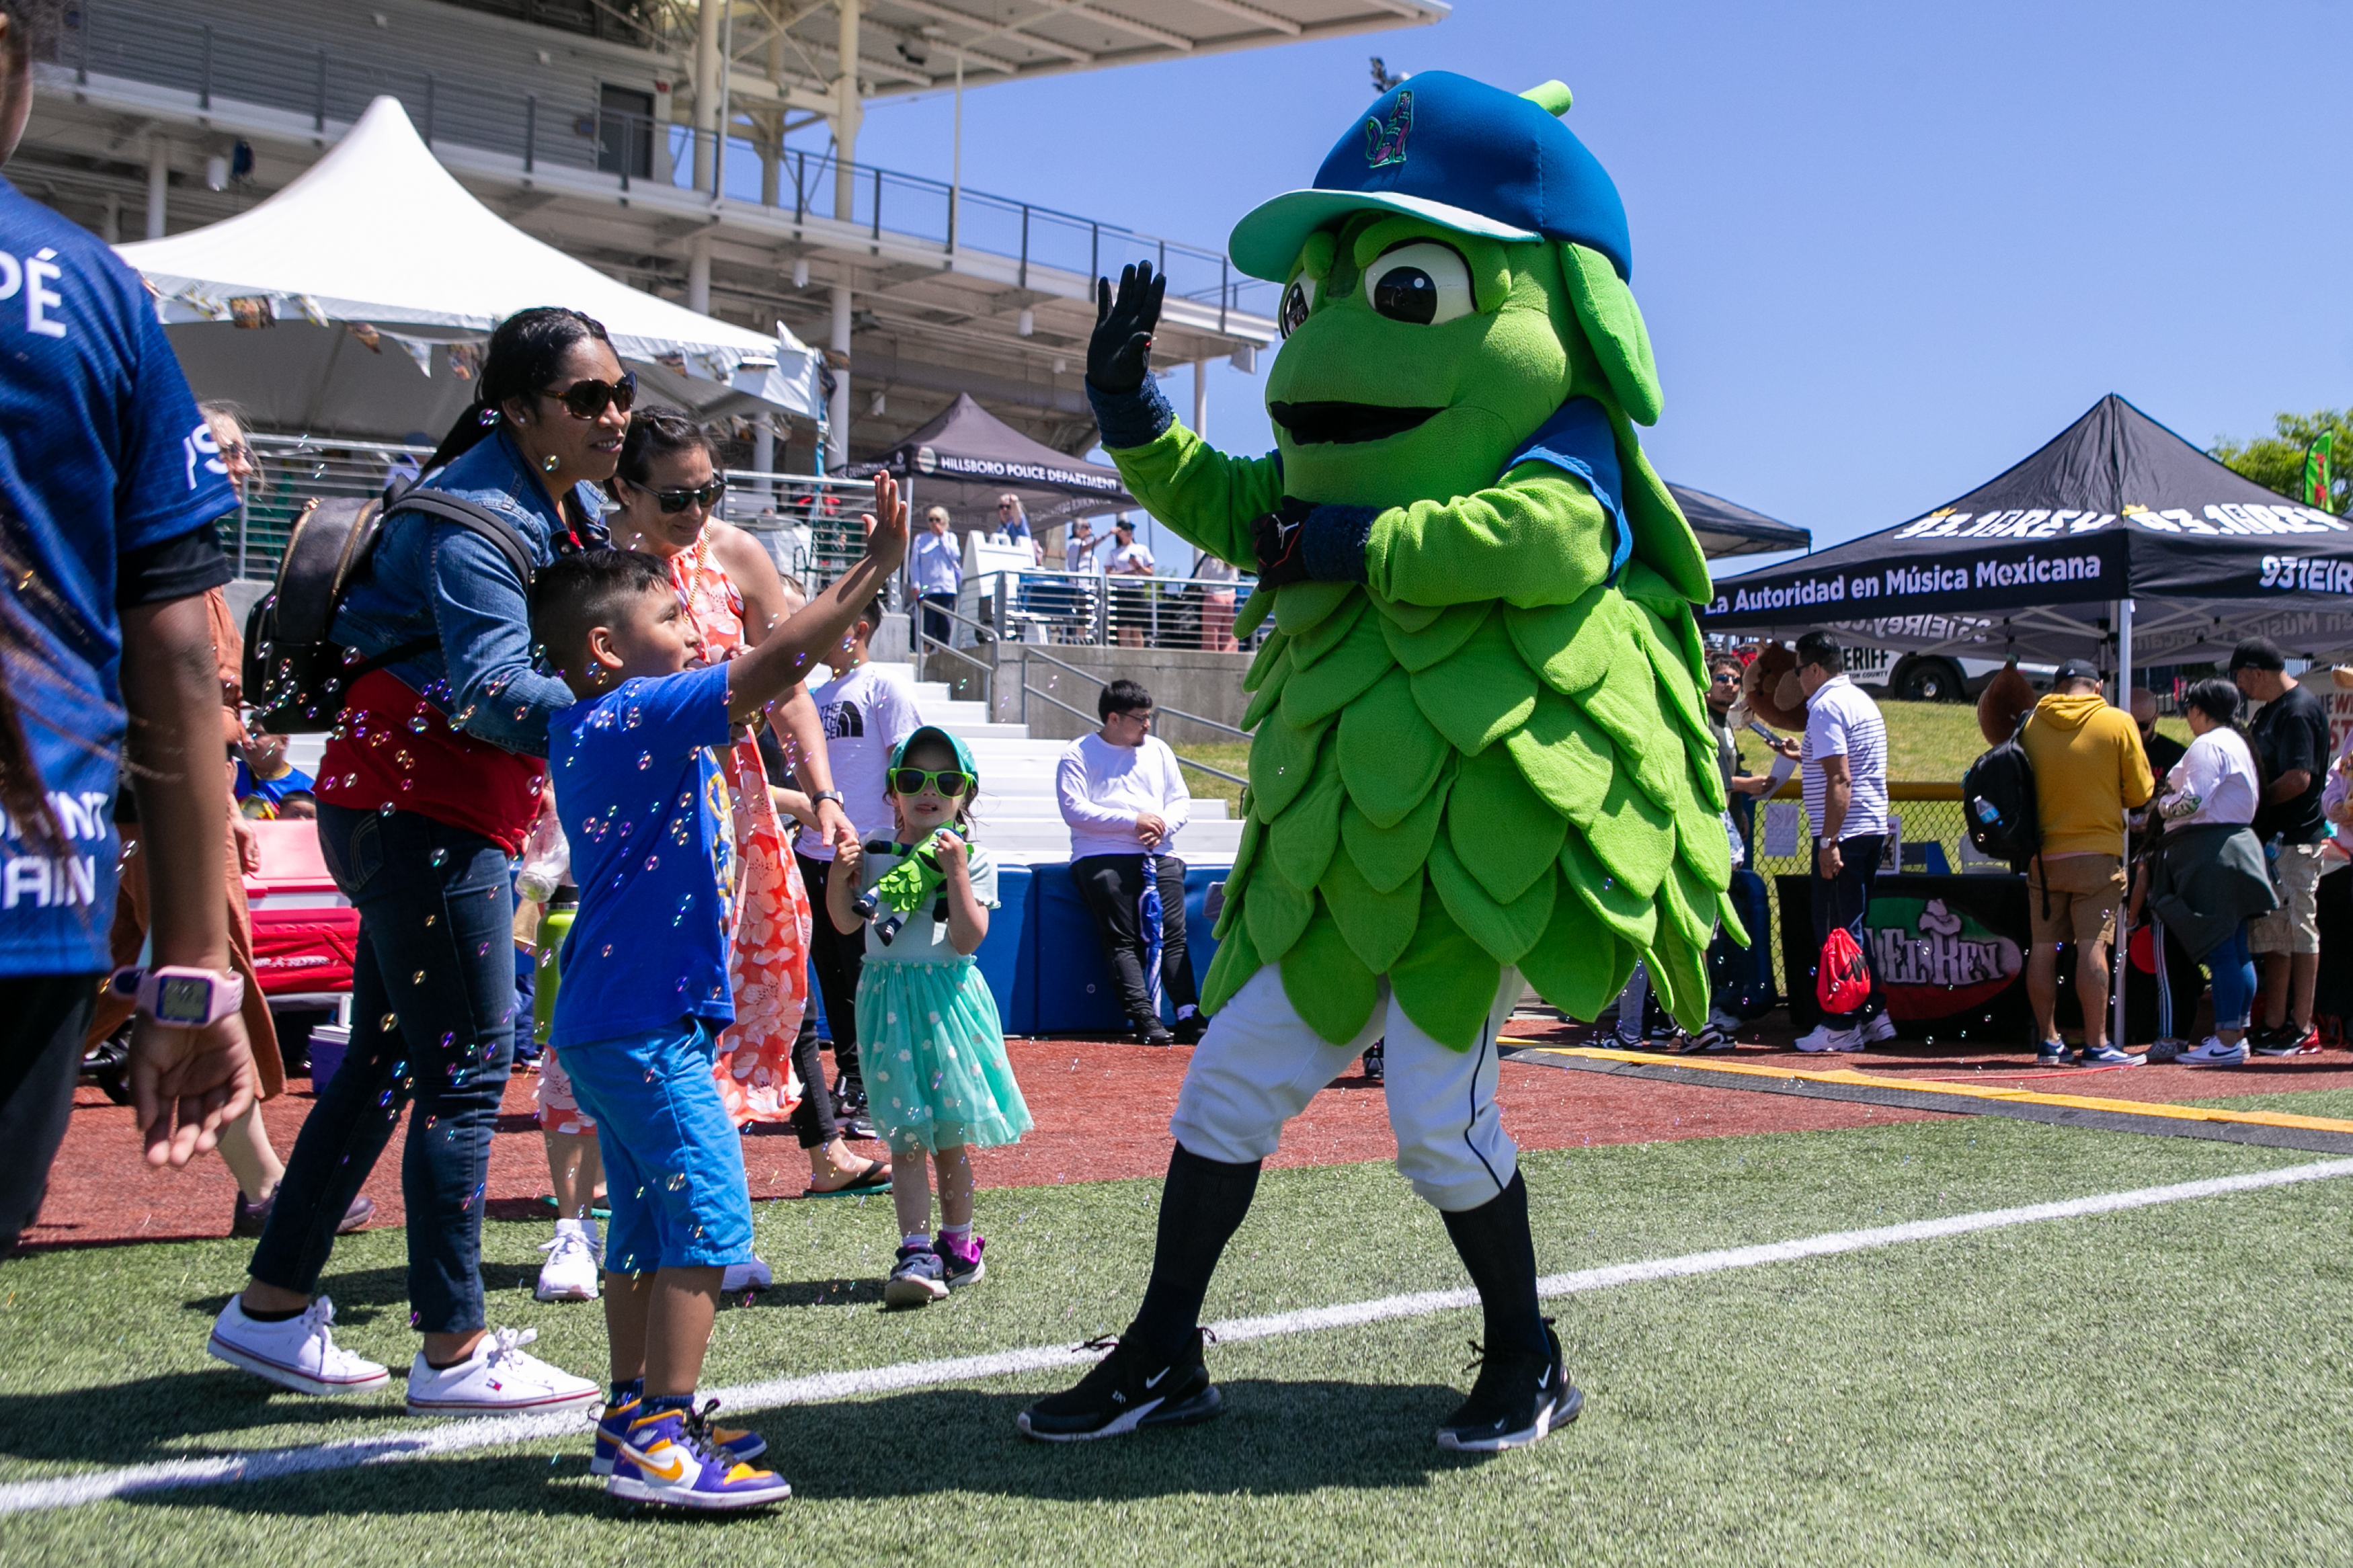 Hillsboro Hops finalize MLB deal, prepare for dramatic growth